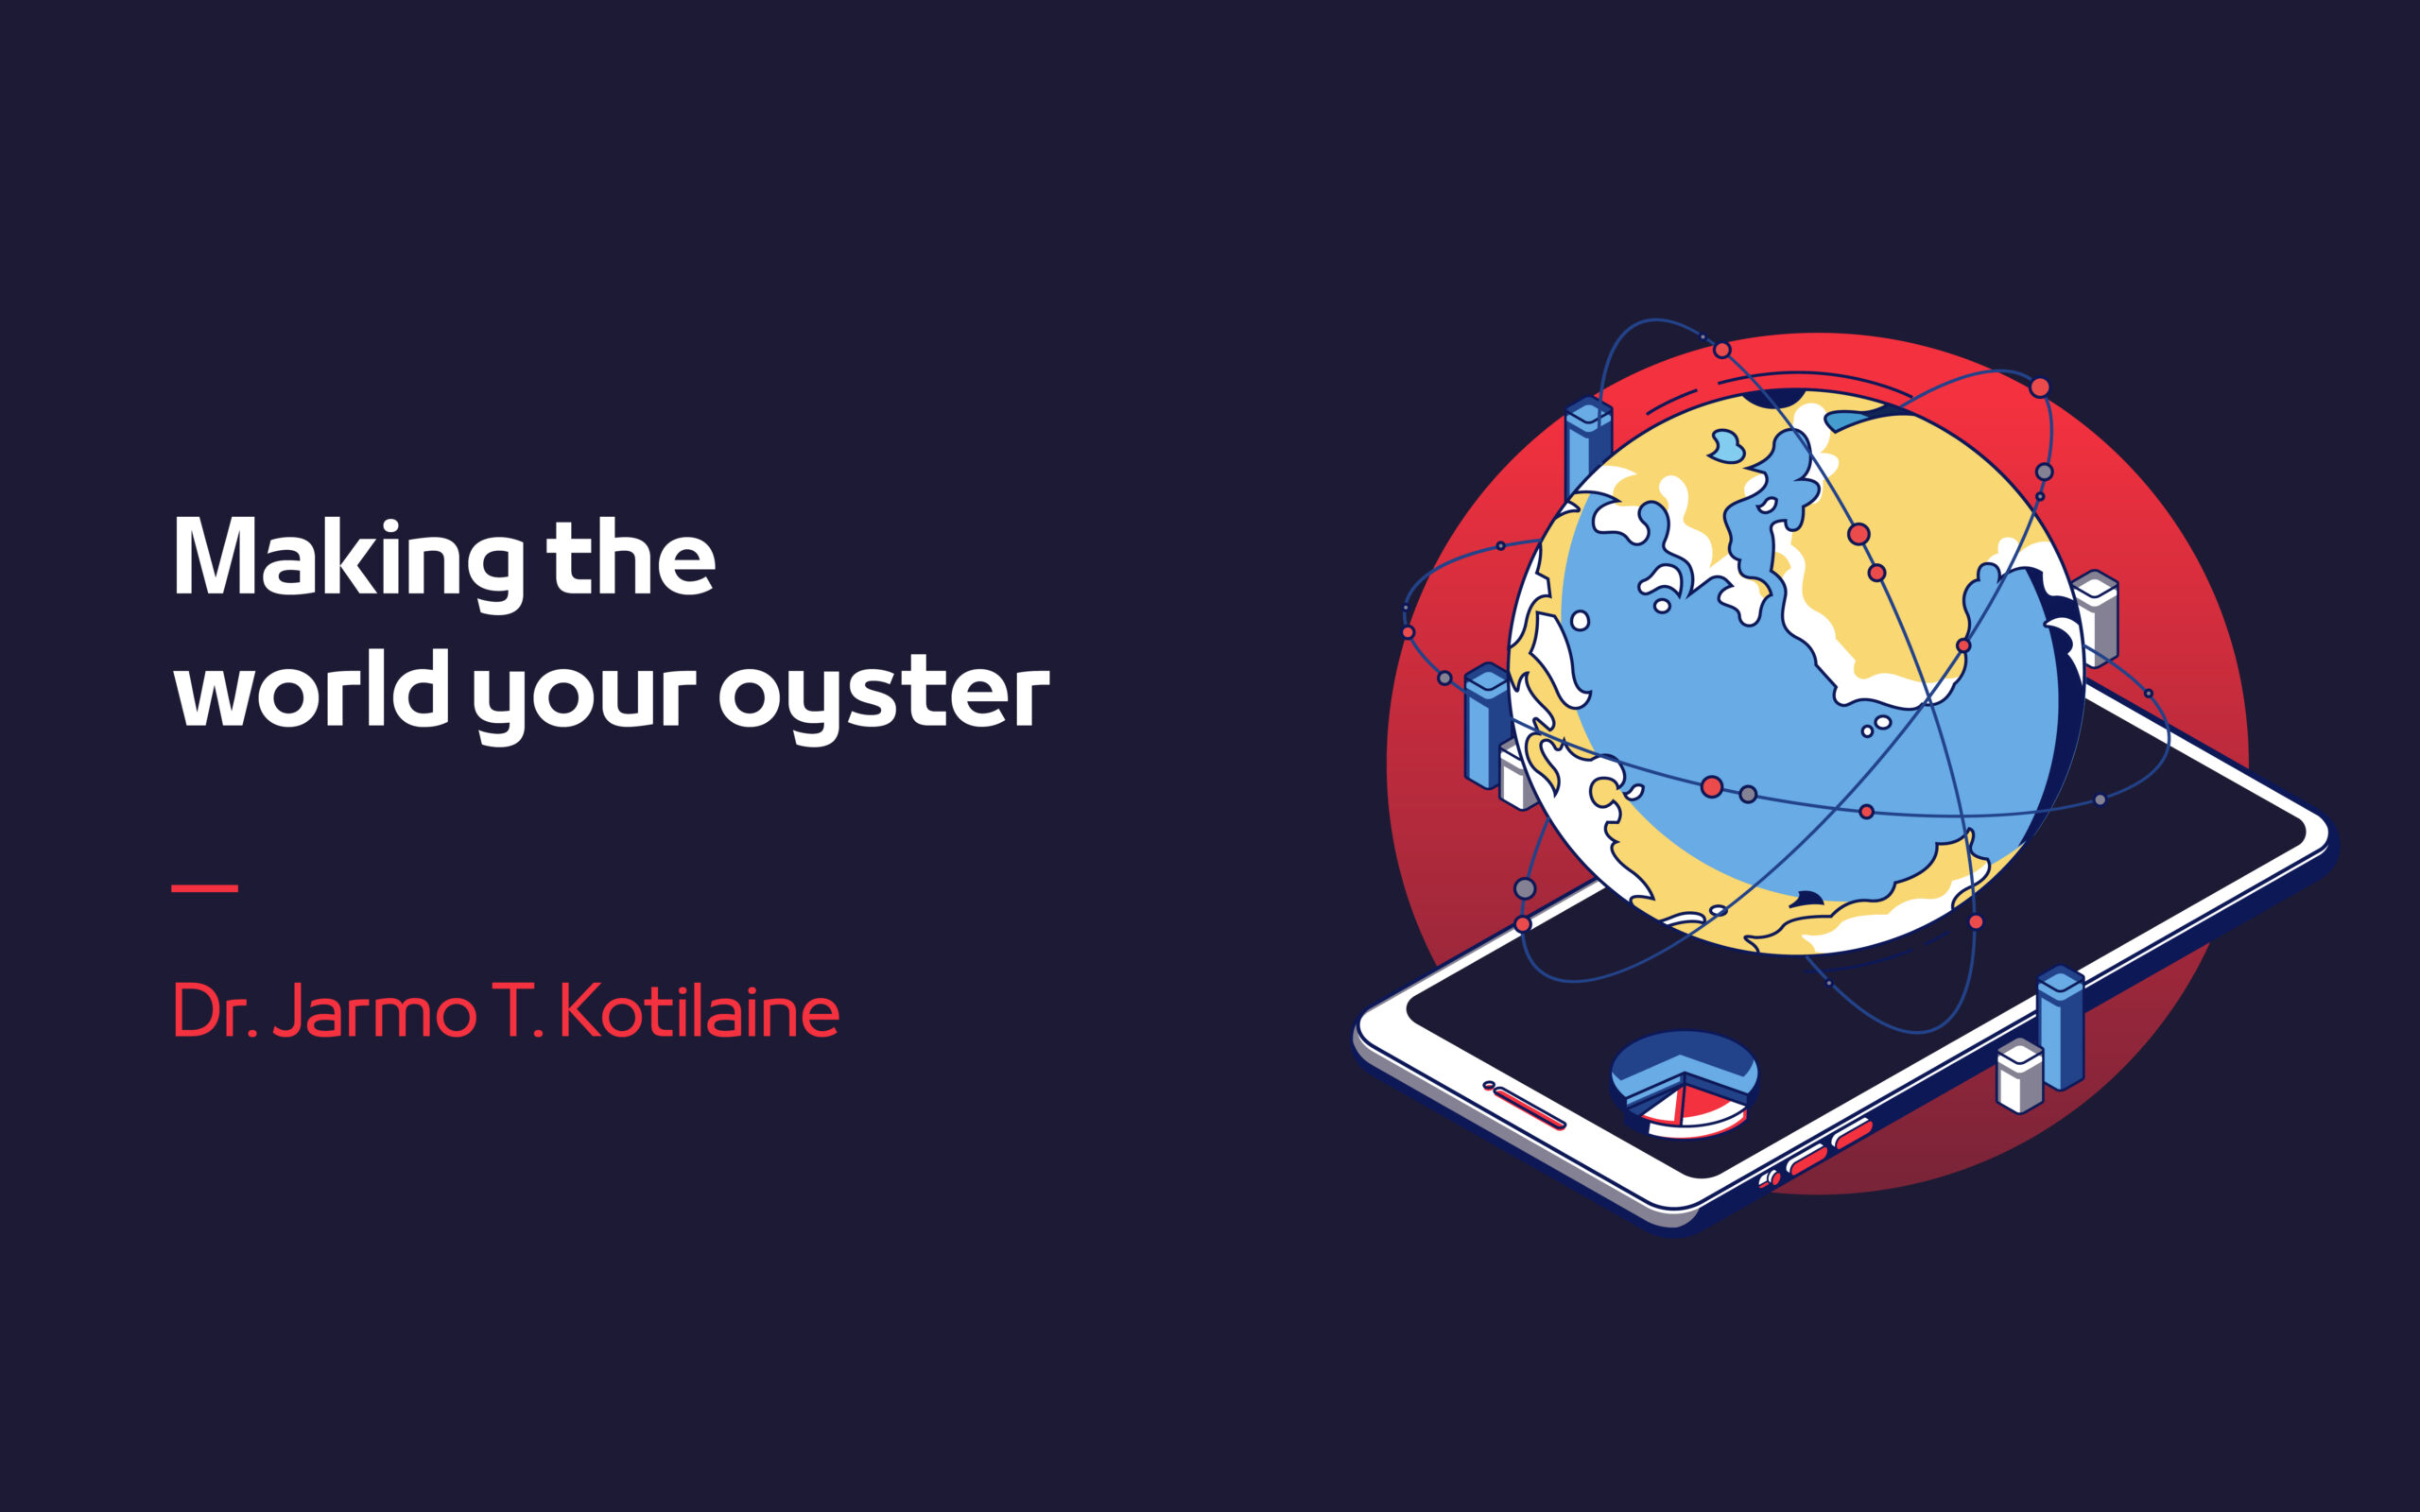 Making the world your oyster